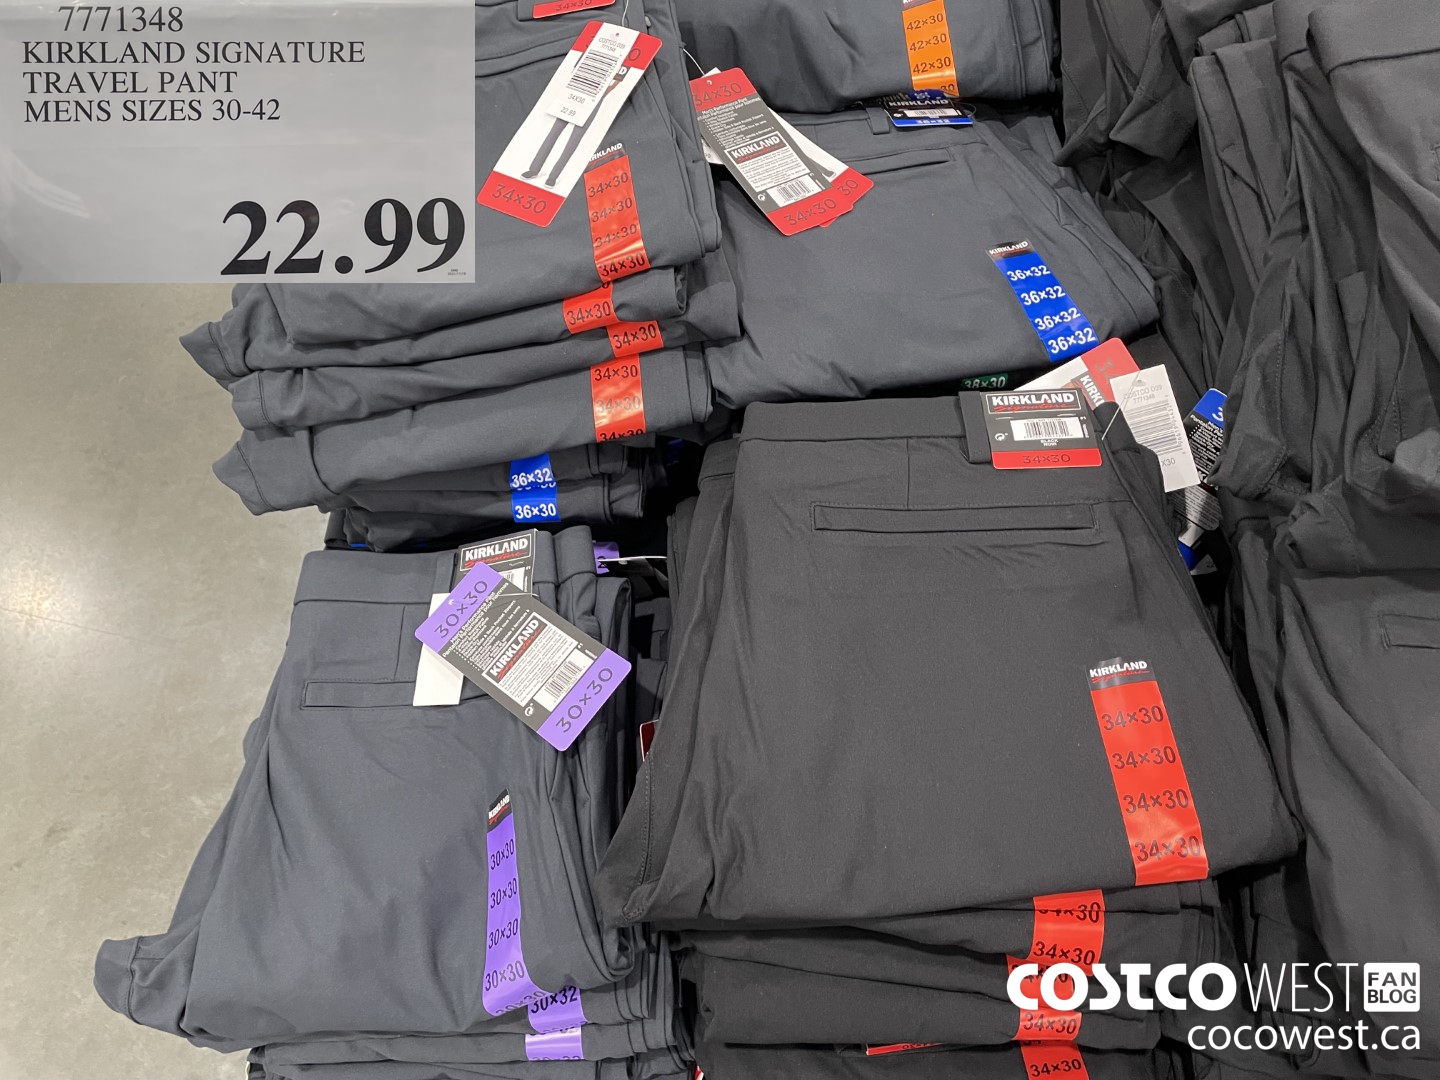 Costco 2021 Superpost! The Entire Clothing & Undergarment Section